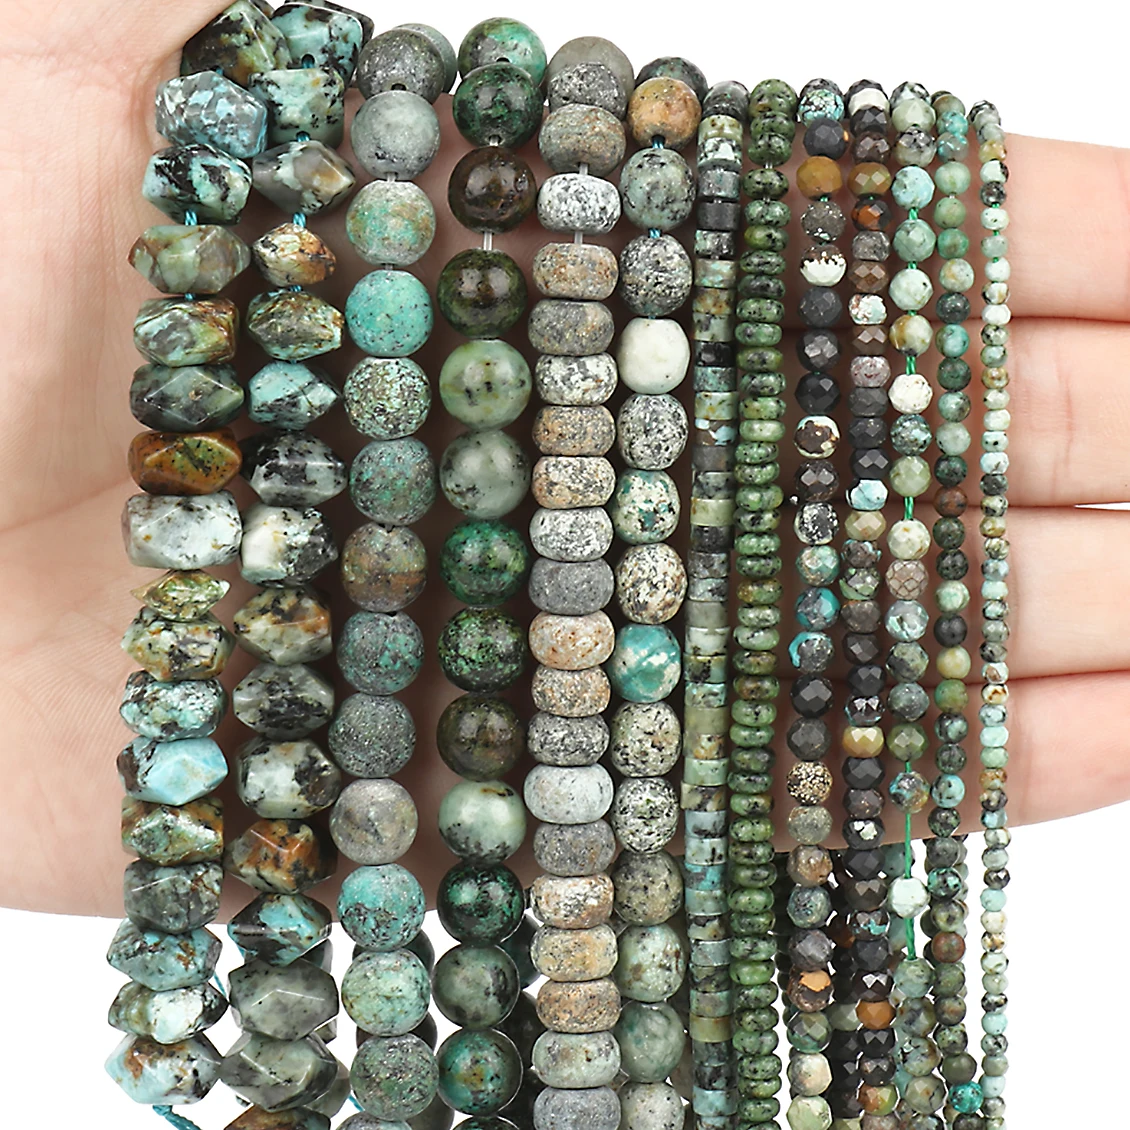 

Natural African Turquoise Stone Beads Various Round Faceted Dull Pollish Loose Charms For Jewelry Making DIY Bracelet Necklace